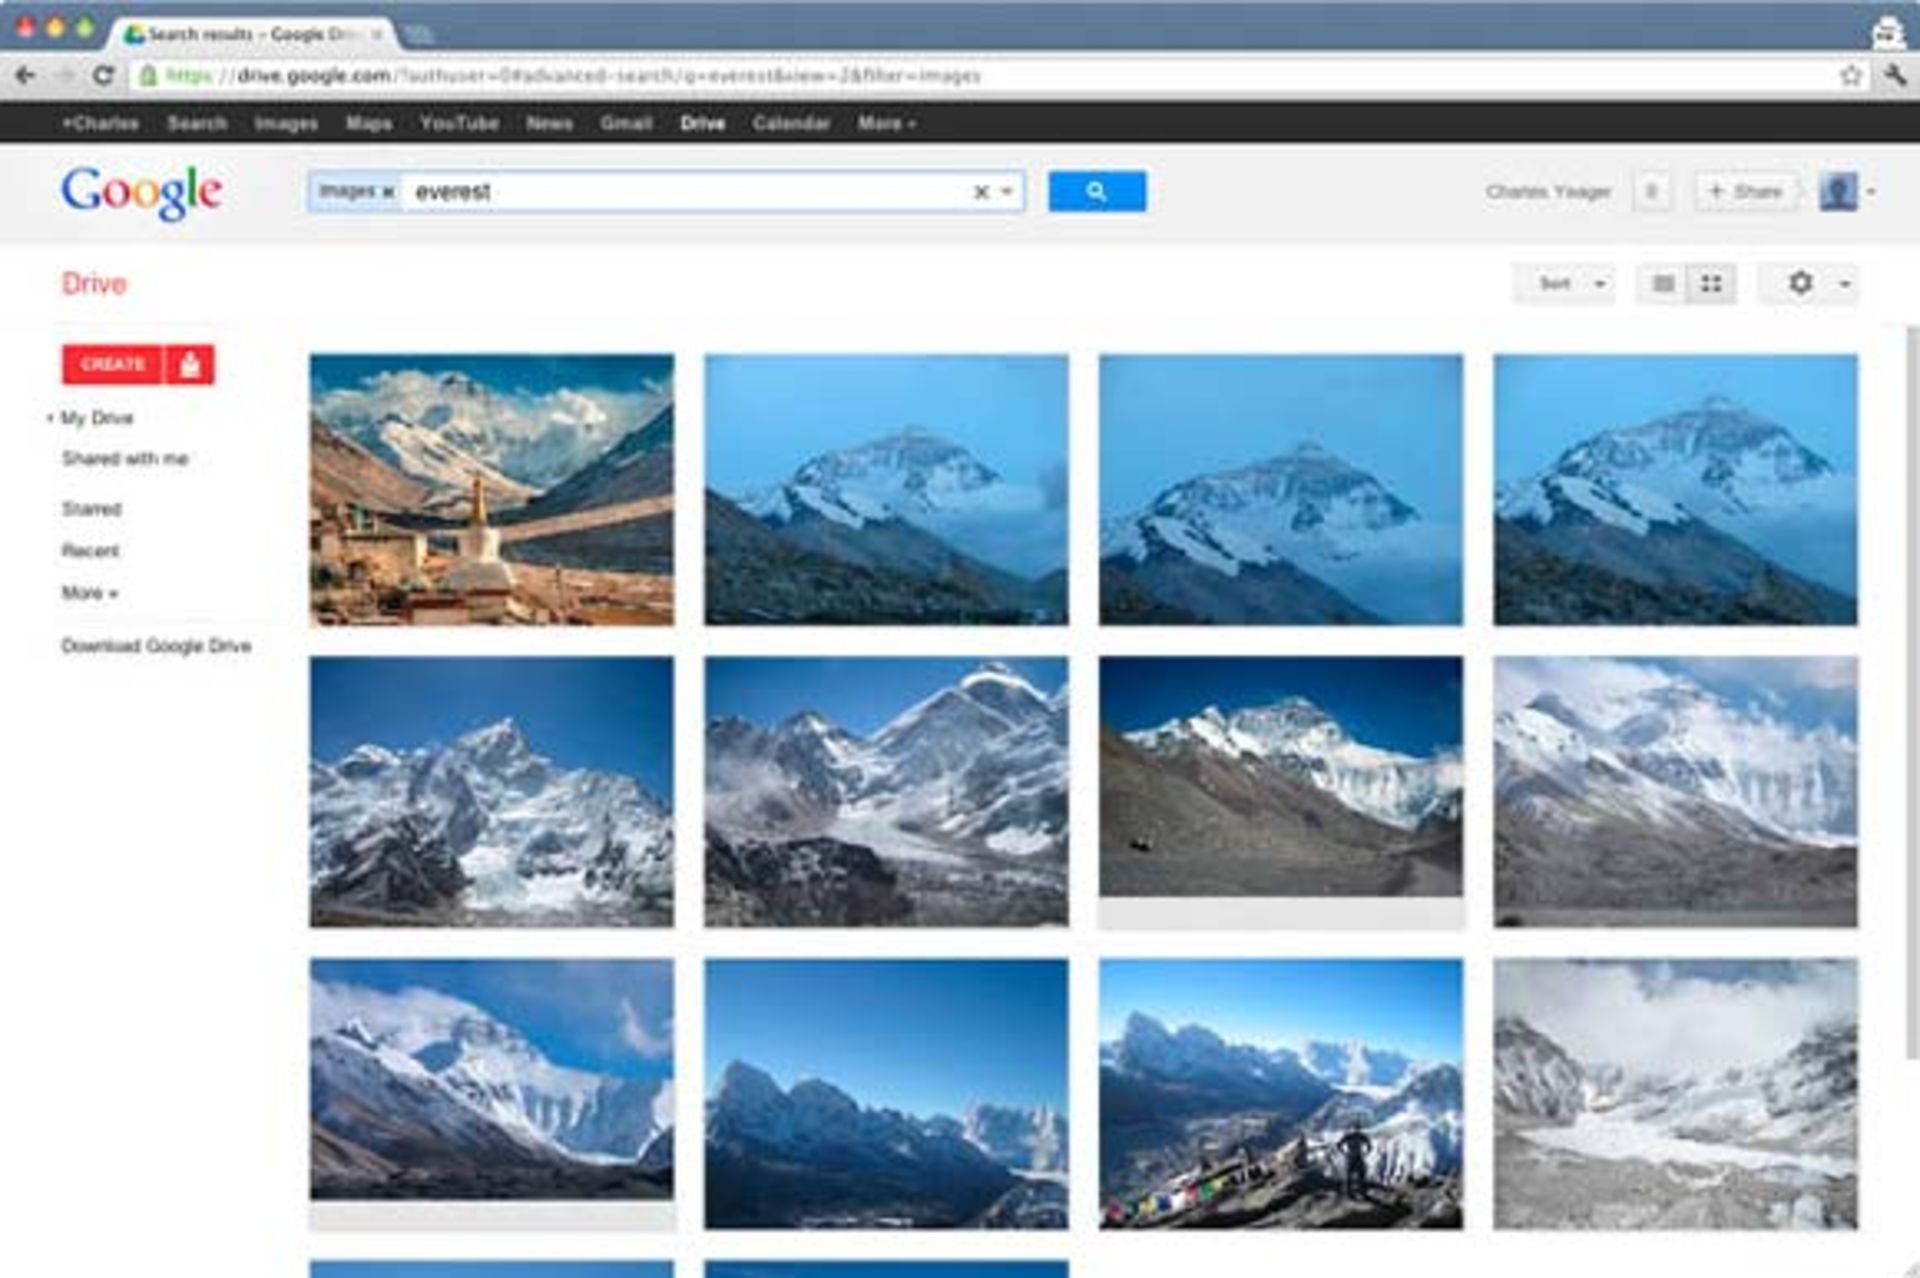 Google-Drive-Everest-search-results